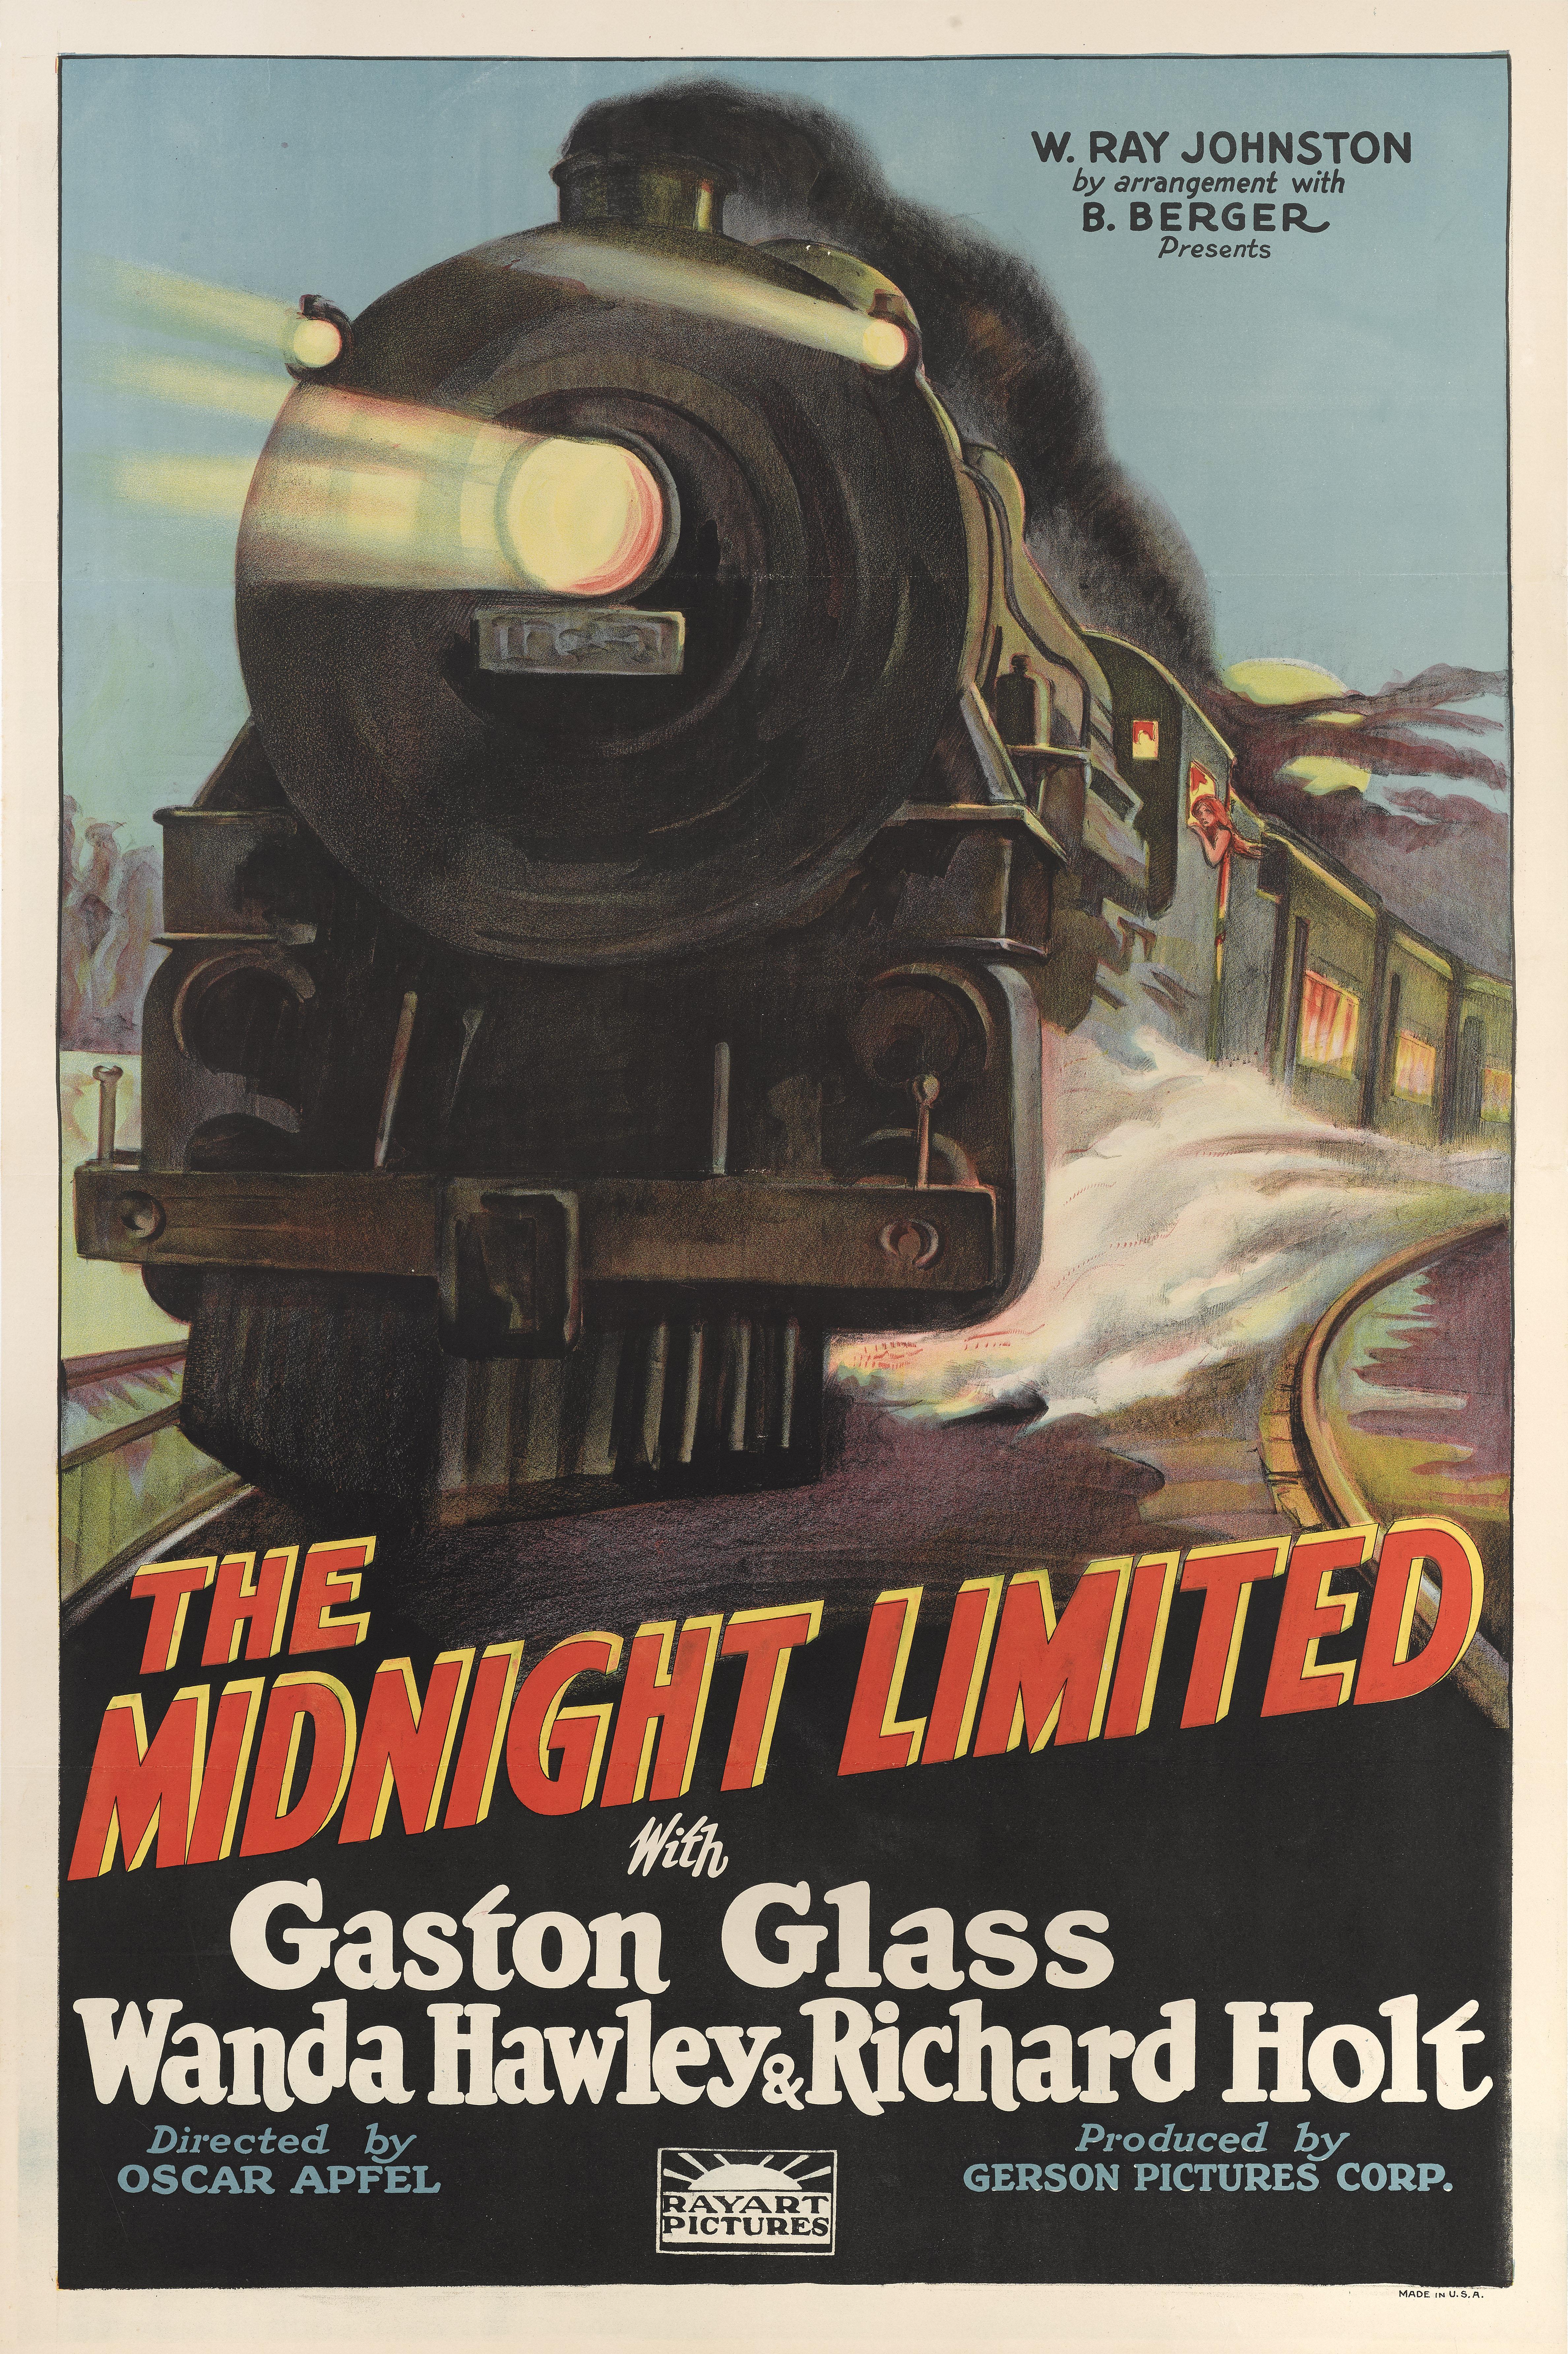 Original US film poster for the 1926 silent action adventure film The Midnight Limited,
starring Gaston Glass and Wanda Hawley.
This film was directed by Oscar Apfel.
This beautiful poster was priced by stone lithography process. It is a rare poster